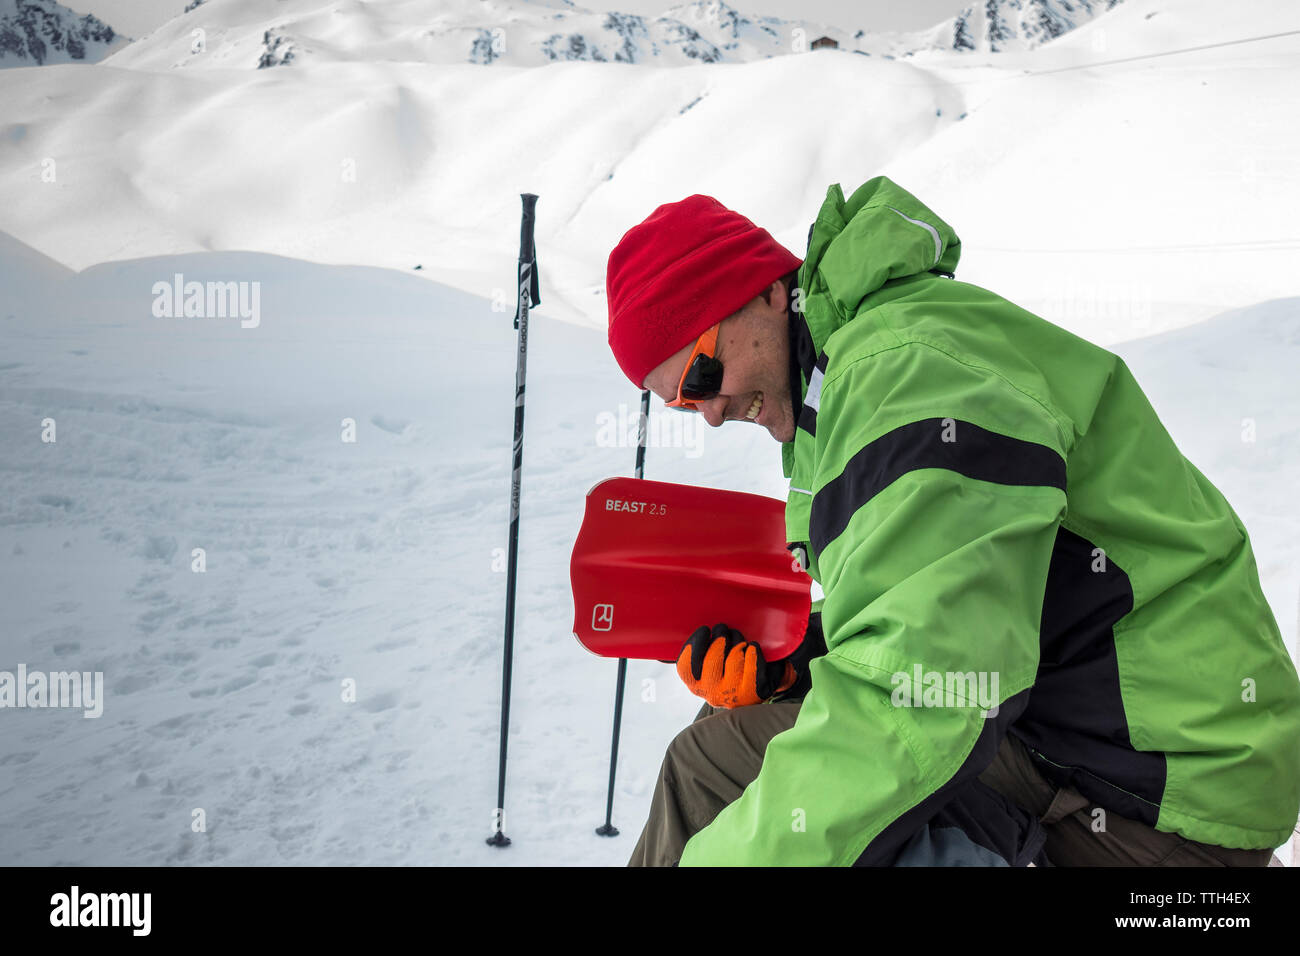 Portrait of a smiling man storing away an avalanche shovel Stock Photo